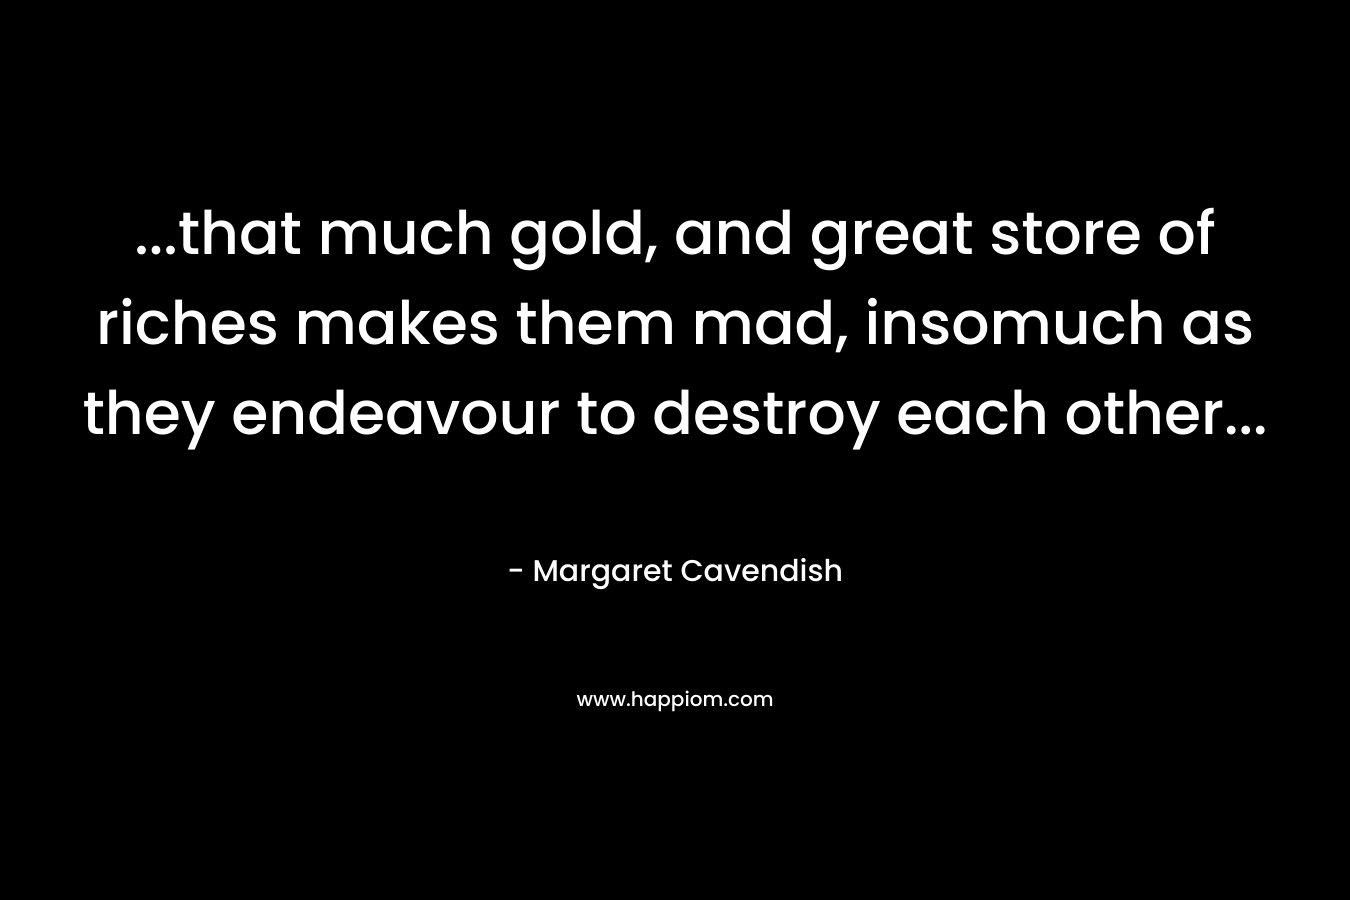 …that much gold, and great store of riches makes them mad, insomuch as they endeavour to destroy each other… – Margaret Cavendish